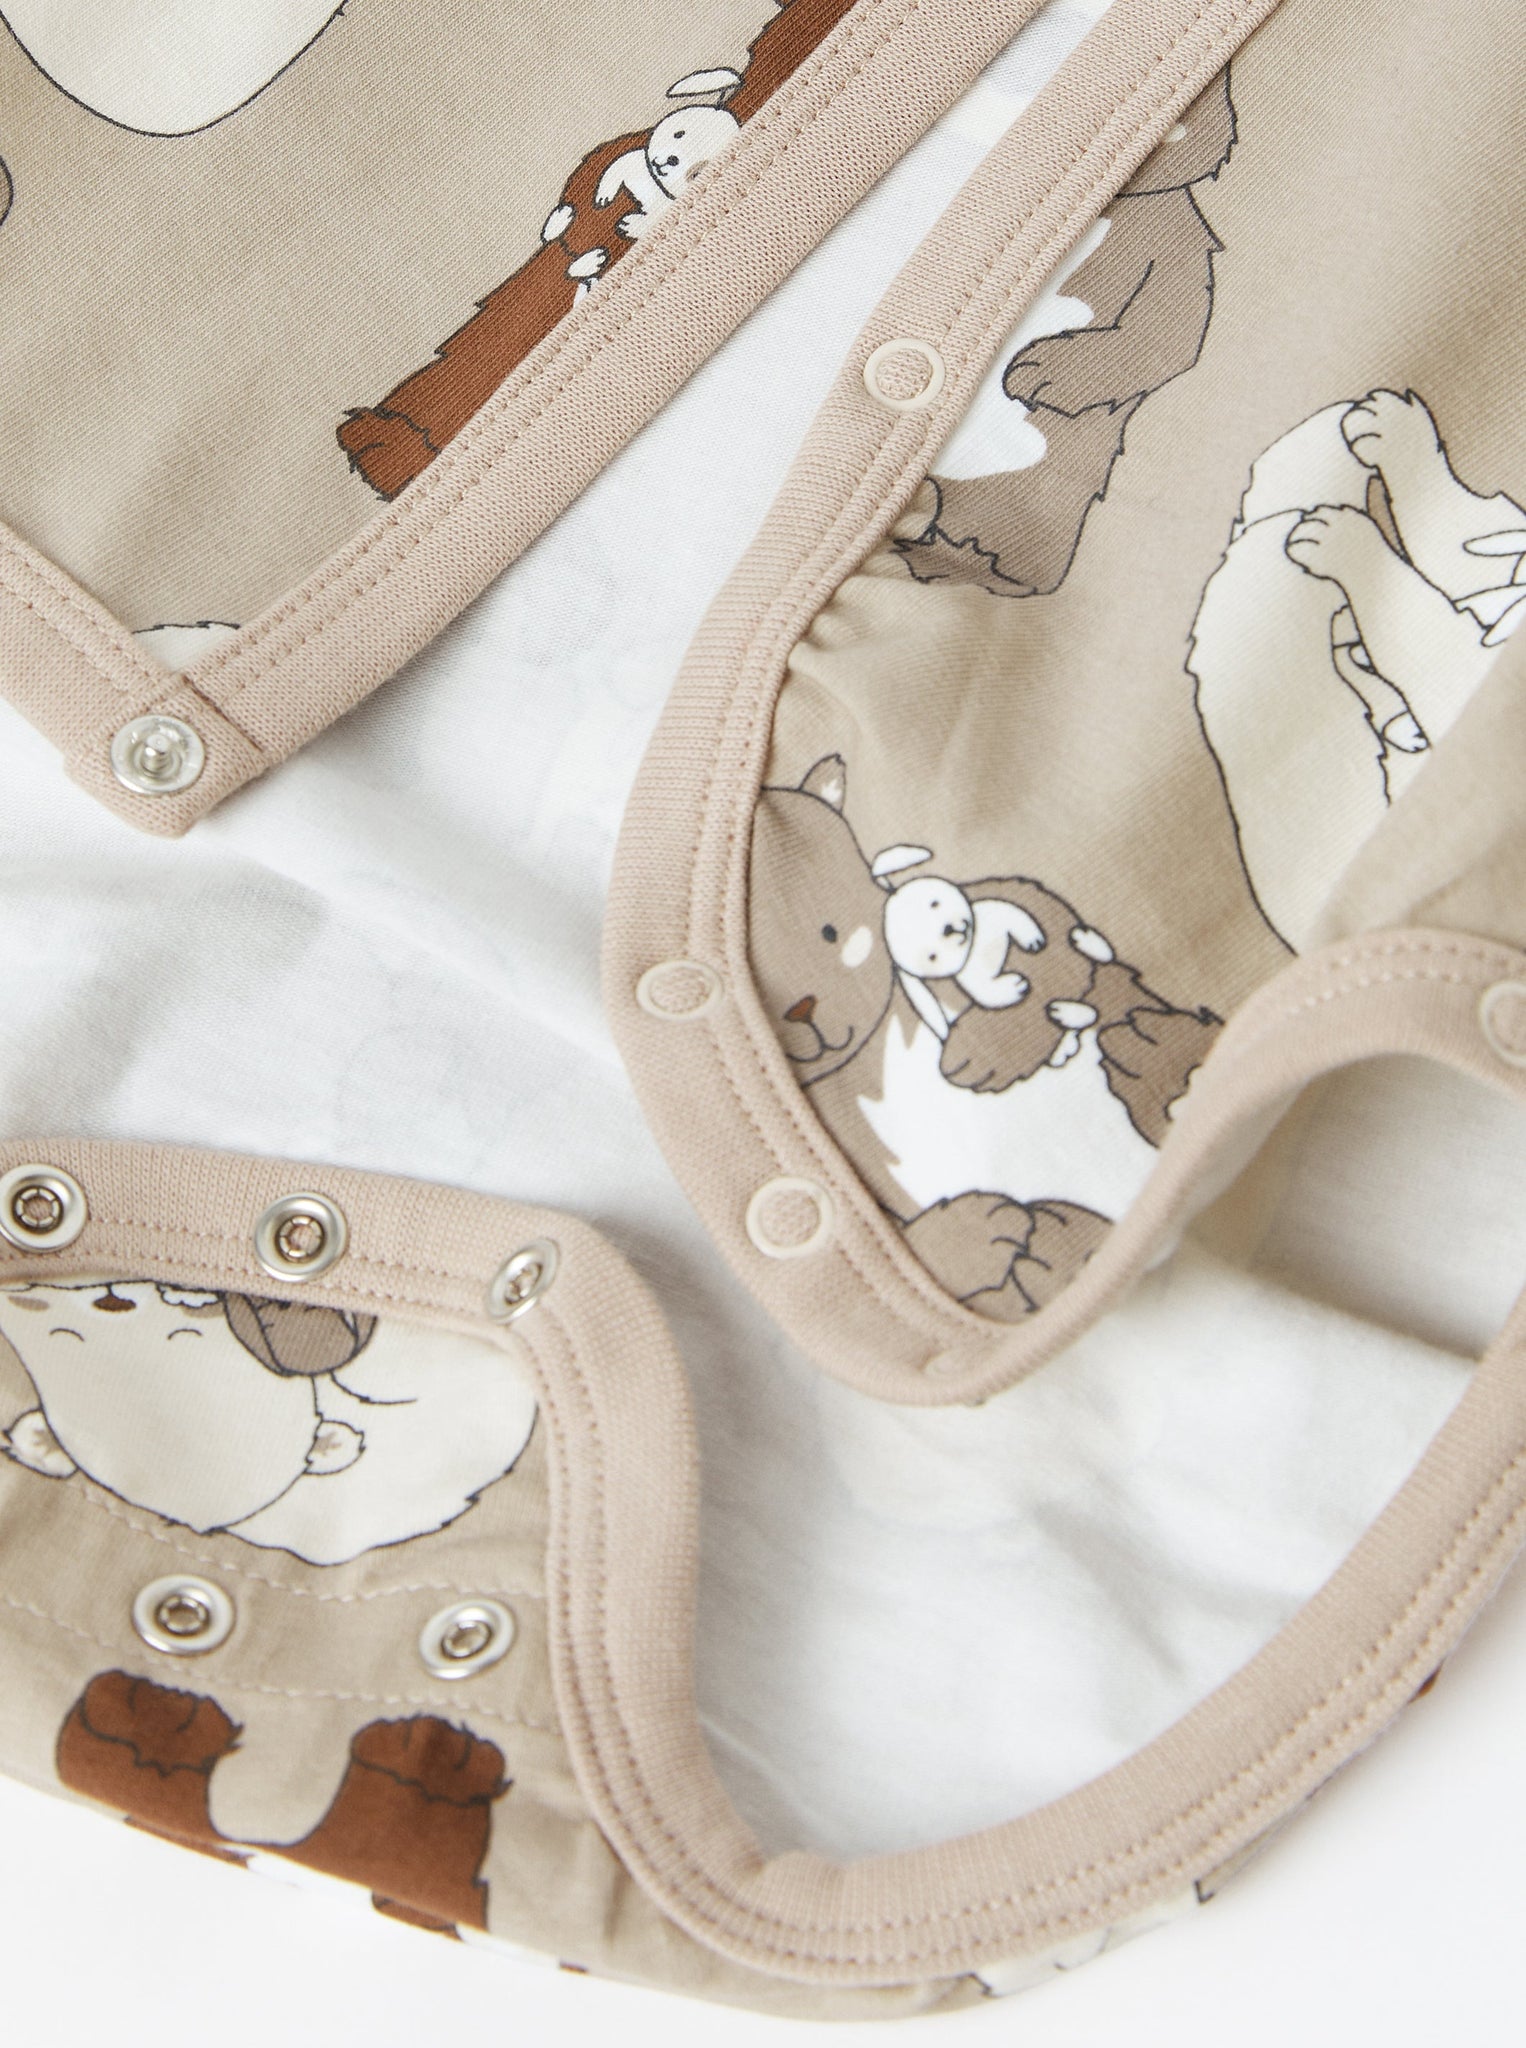 Bear Print Wraparound Babygrow from the Polarn O. Pyret baby collection. Ethically produced baby clothing.